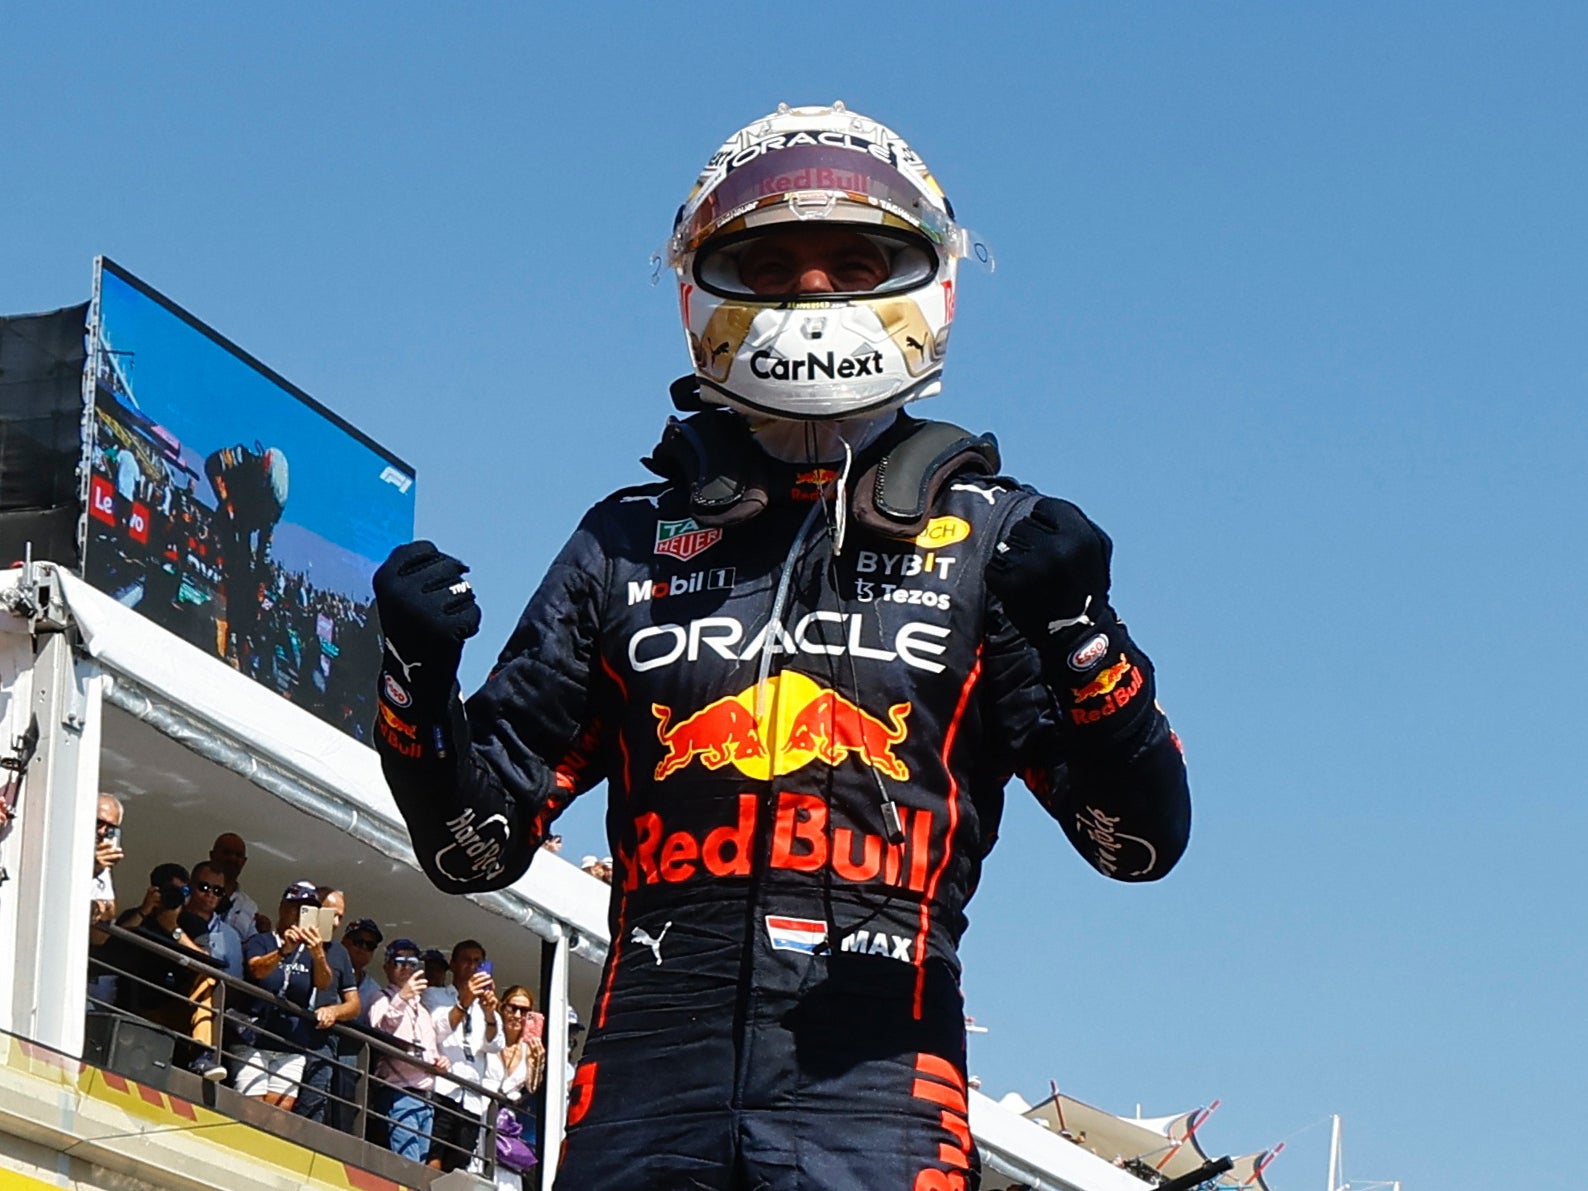 Verstappen capitalised on Leclerc’s DNF to extend his championship lead